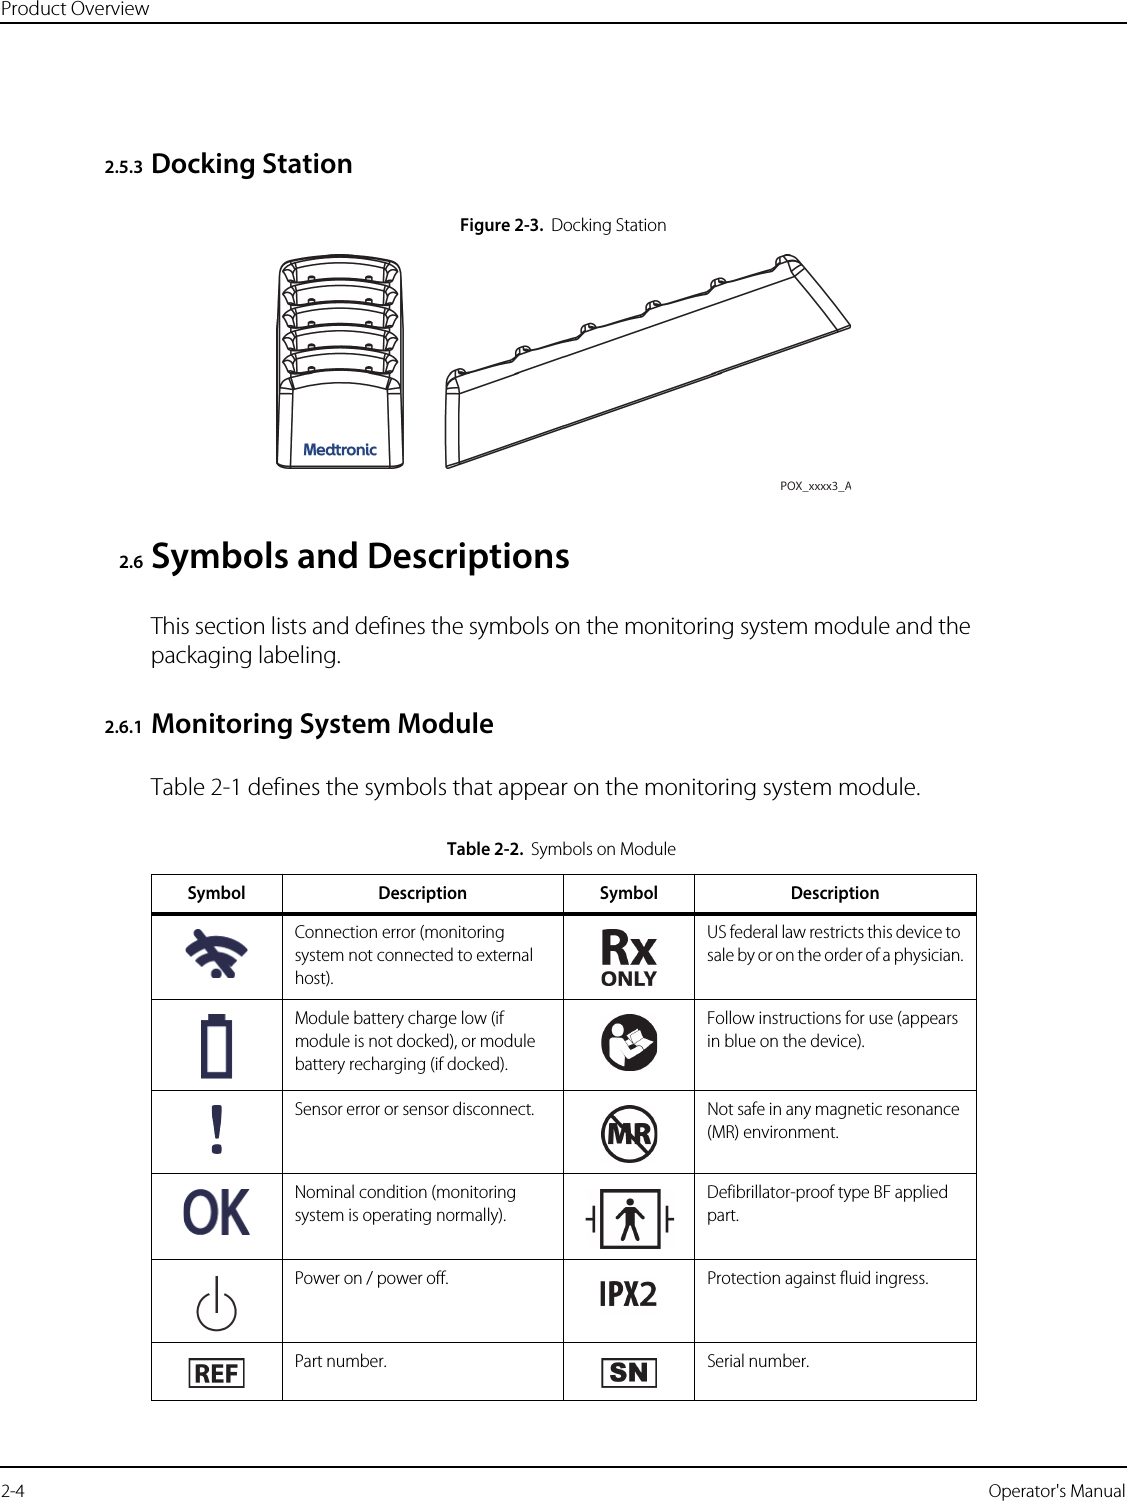 Product Overview2-4   Operator&apos;s Manual2.5.3 Docking StationFigure2-3.Docking Station2.6 Symbols and DescriptionsThis section lists and defines the symbols on the monitoring system module and the packaging labeling.2.6.1 Monitoring System ModuleTable 2-1 defines the symbols that appear on the monitoring system module.Table2-2.Symbols on ModuleSymbol Description Symbol DescriptionConnection error (monitoring system not connected to external host).US federal law restricts this device to sale by or on the order of a physician.Module battery charge low (if module is not docked), or module battery recharging (if docked).Follow instructions for use (appears in blue on the device).Sensor error or sensor disconnect. Not safe in any magnetic resonance (MR) environment.Nominal condition (monitoring system is operating normally).Defibrillator-proof type BF applied part.Power on / power off. Protection against fluid ingress.Part number. Serial number.